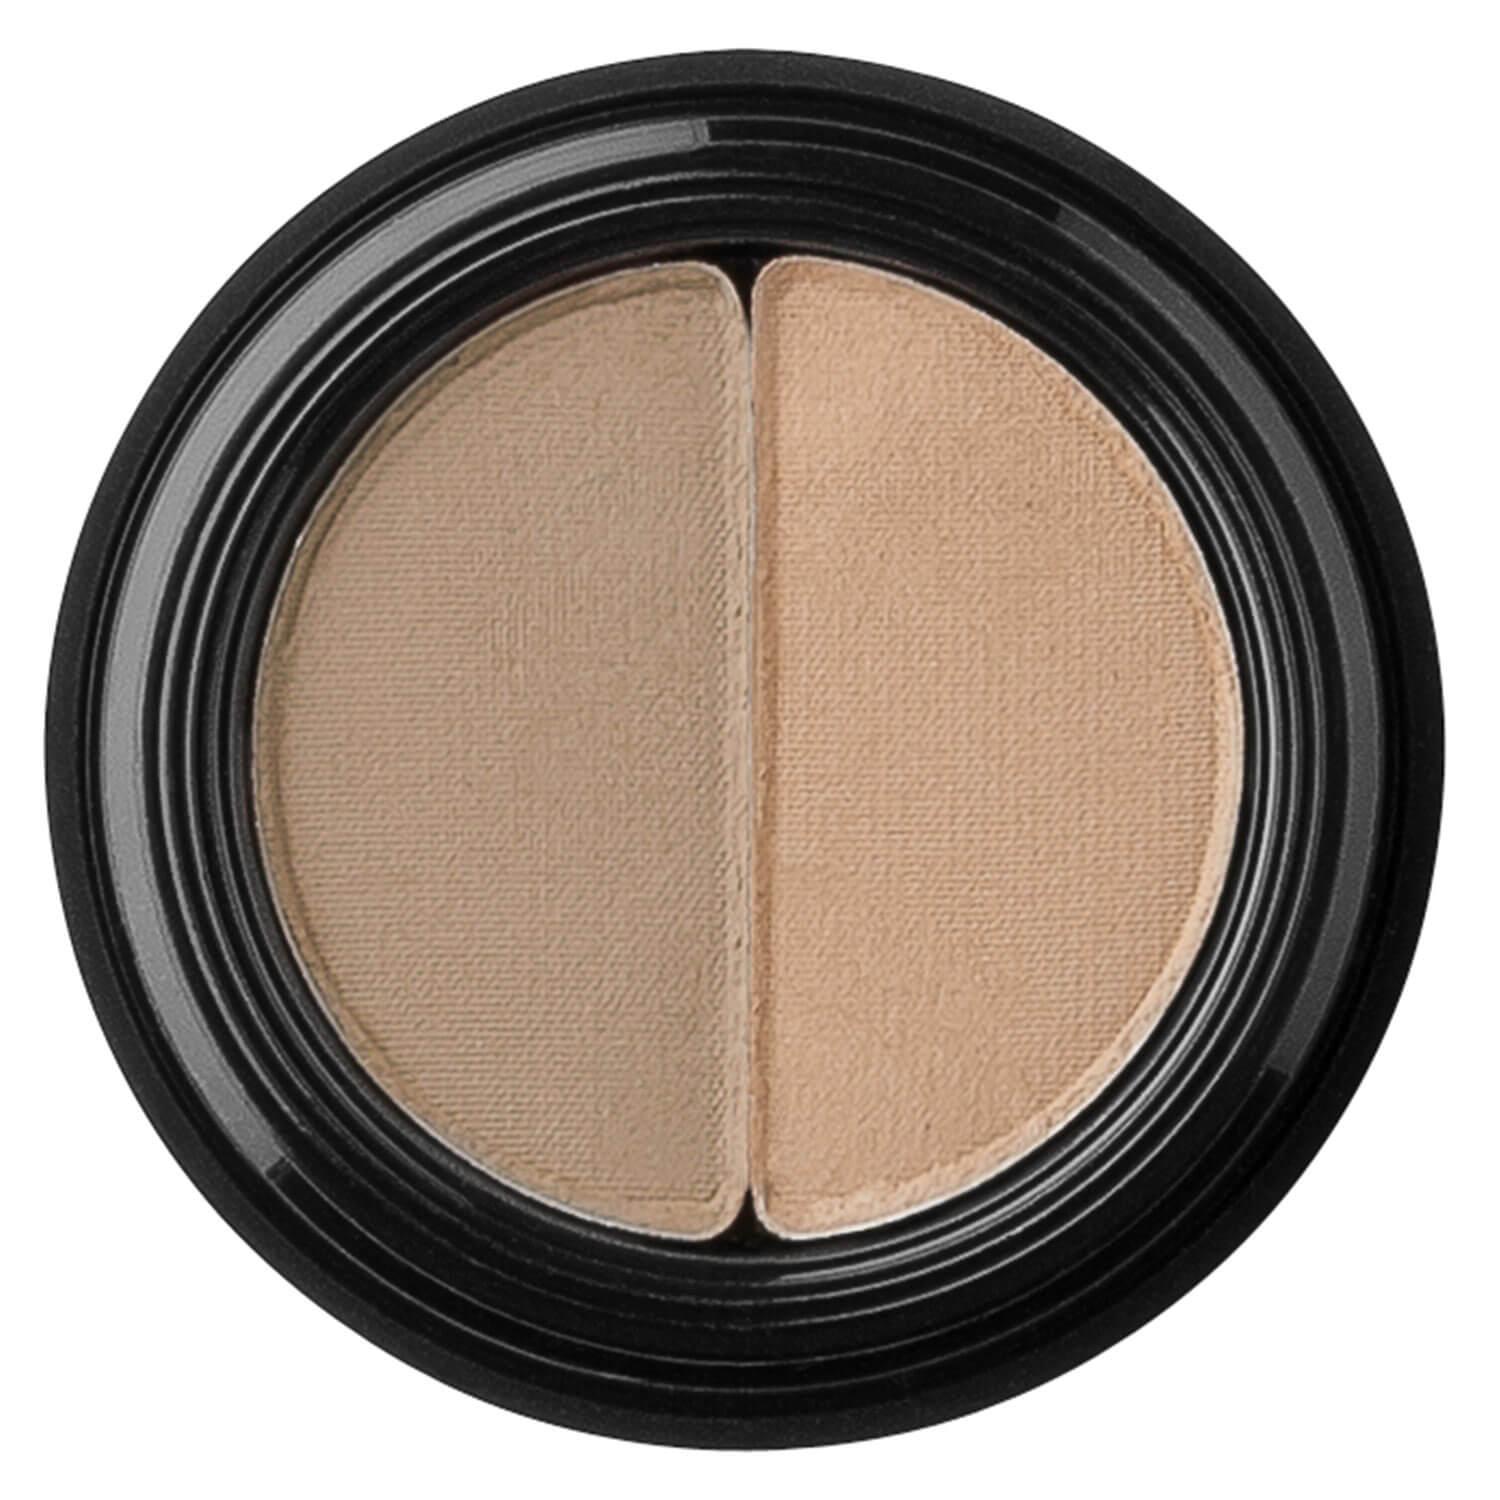 Glo Skin Beauty Brows - Brow Powder Duo Taupe